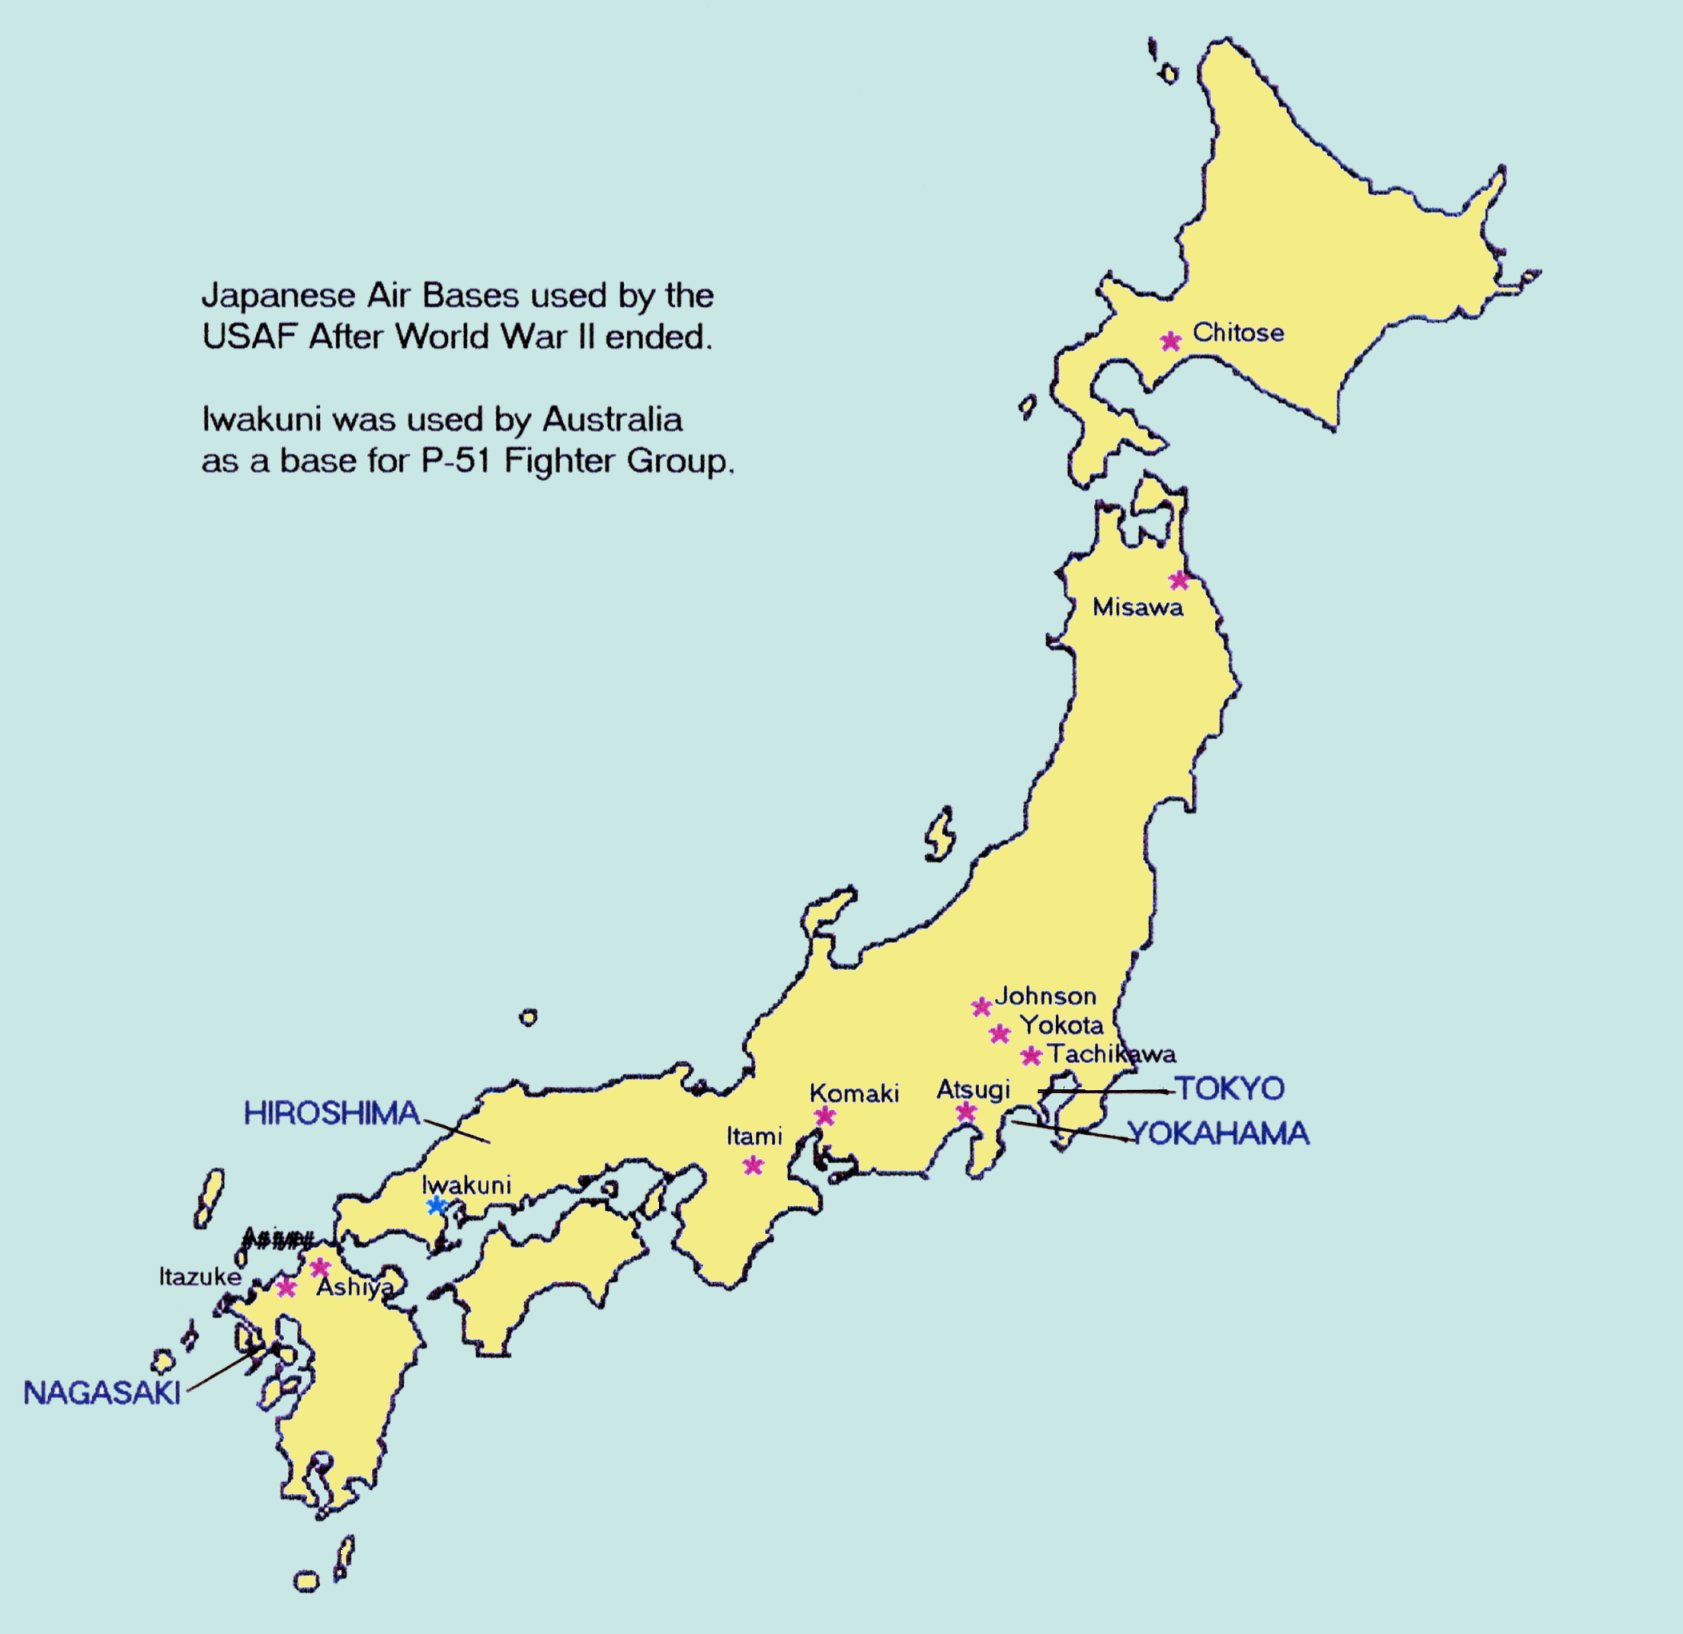 japanese air bases used by the